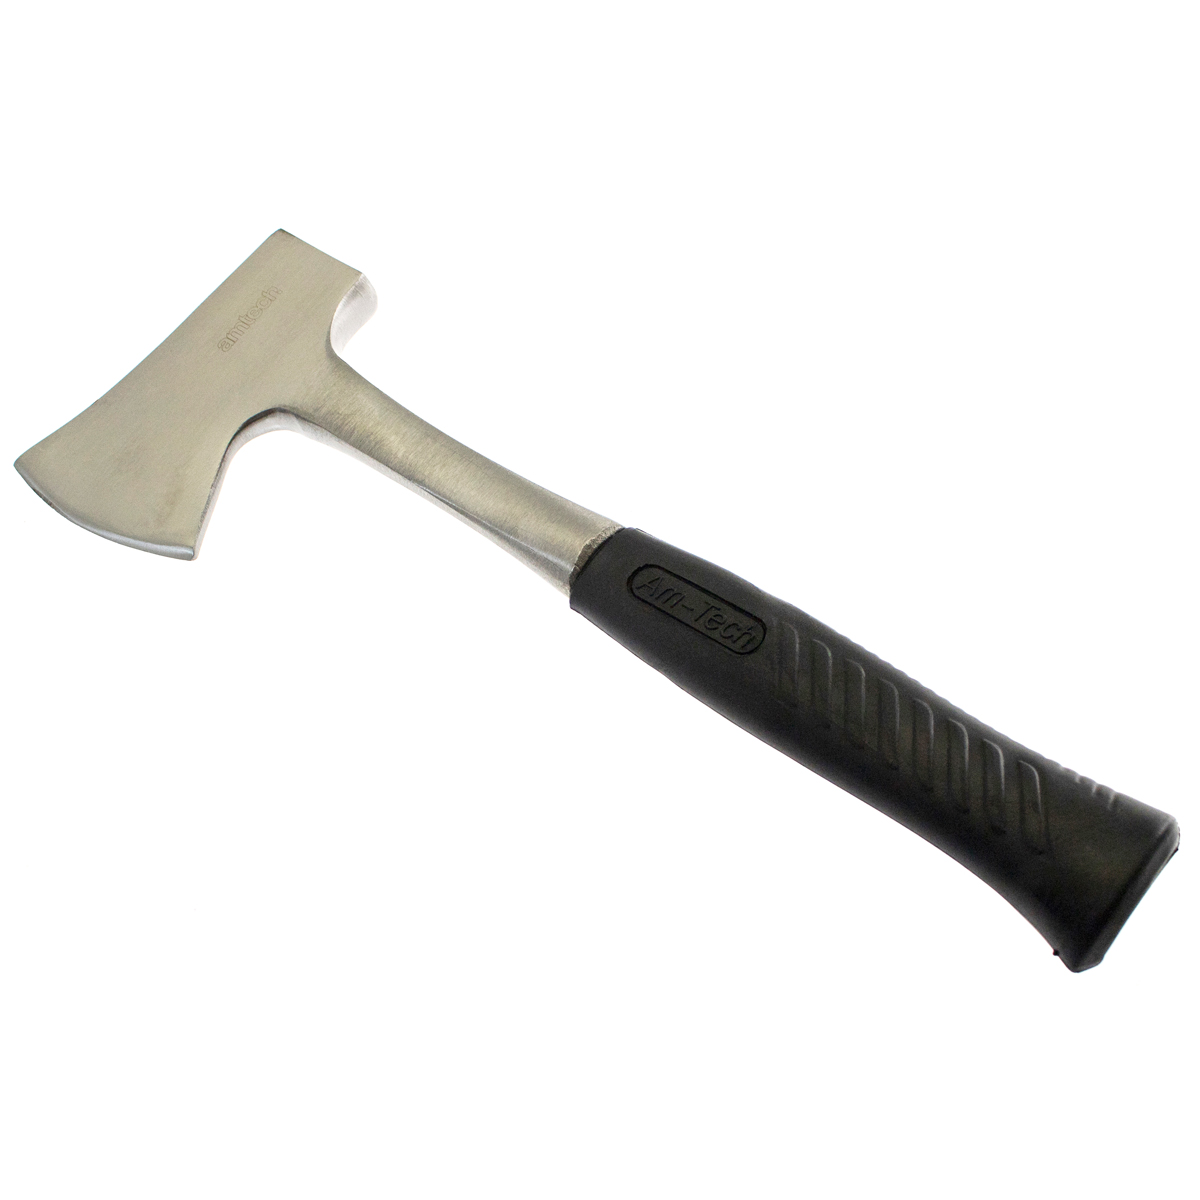 CLEARANCE A2905 ONE PIECE CAMPING AXE ERGO GRIP KINDLING AXE SPLITTER FORGED 